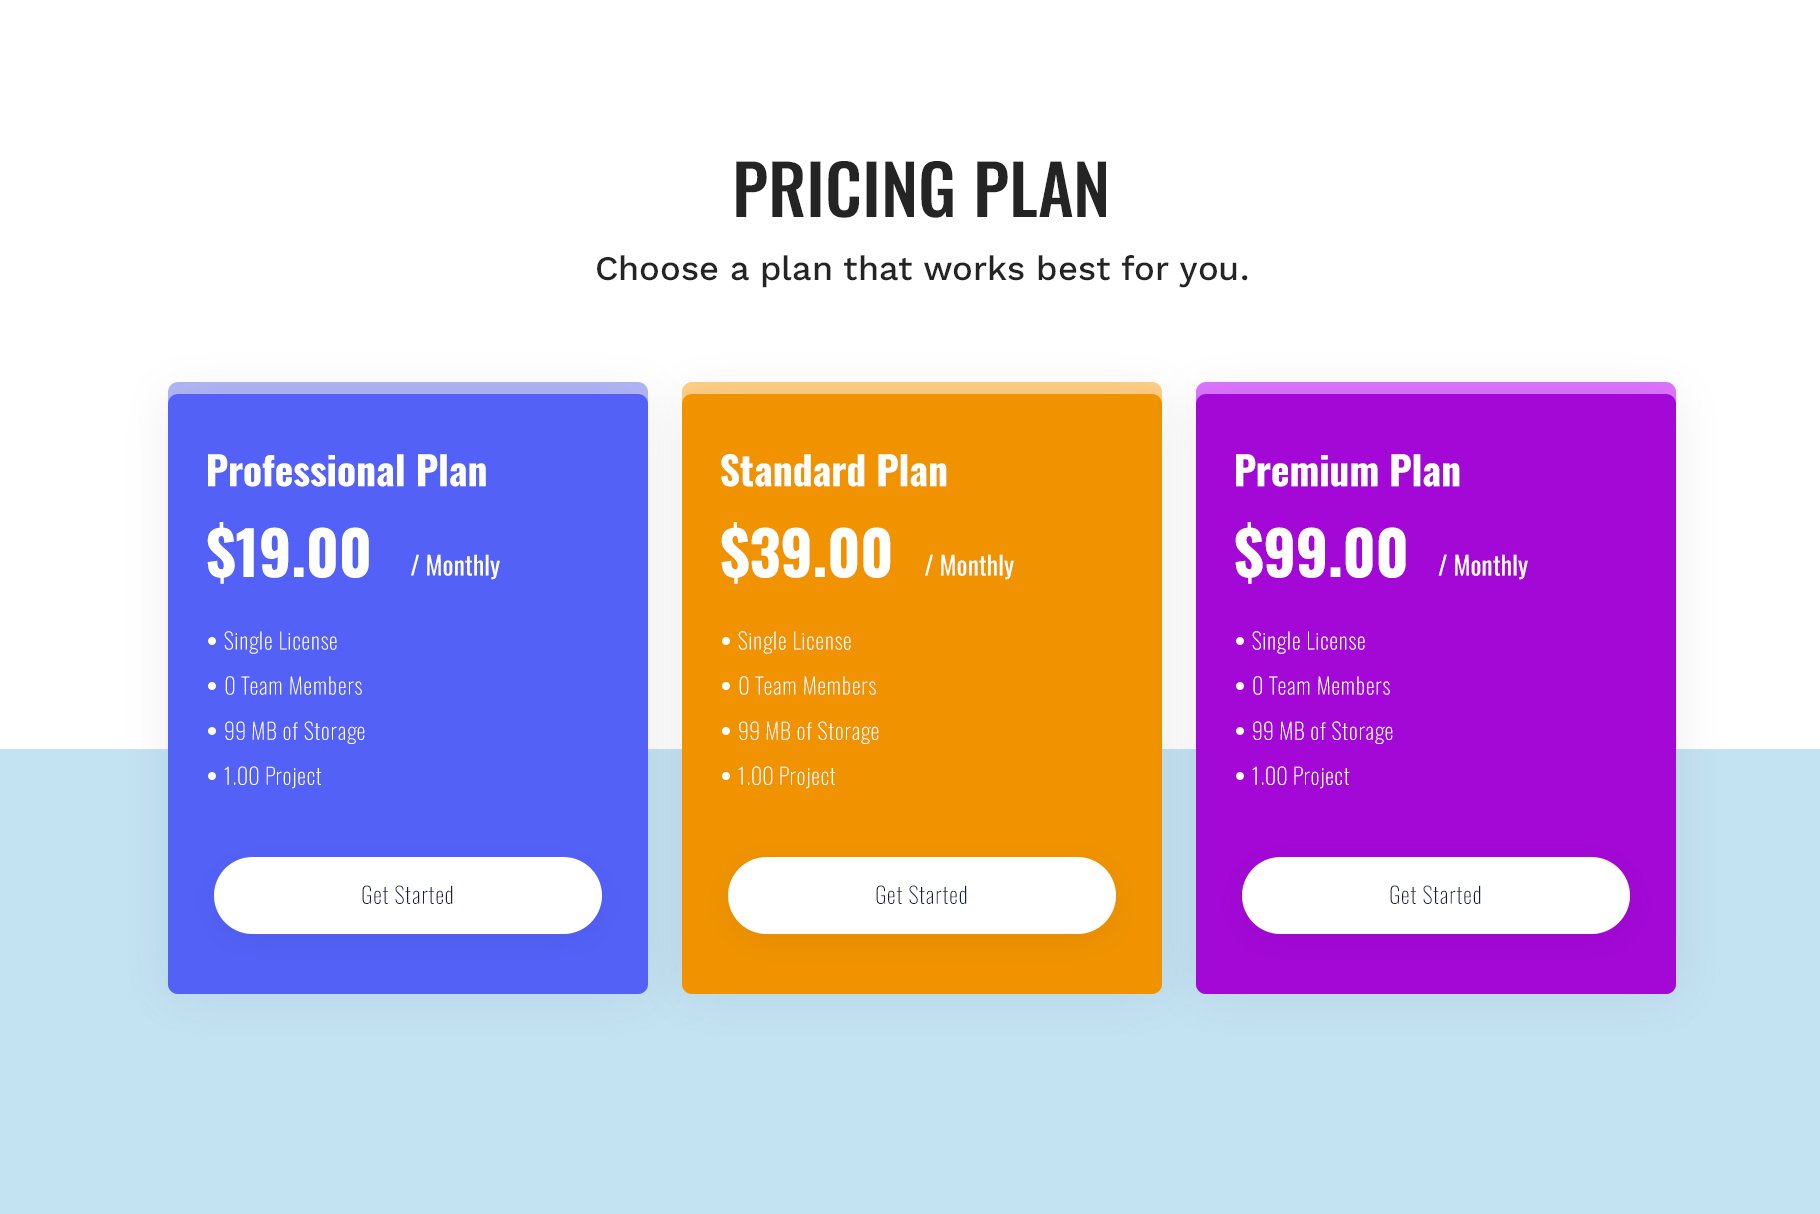 Pricing Plan cover image.